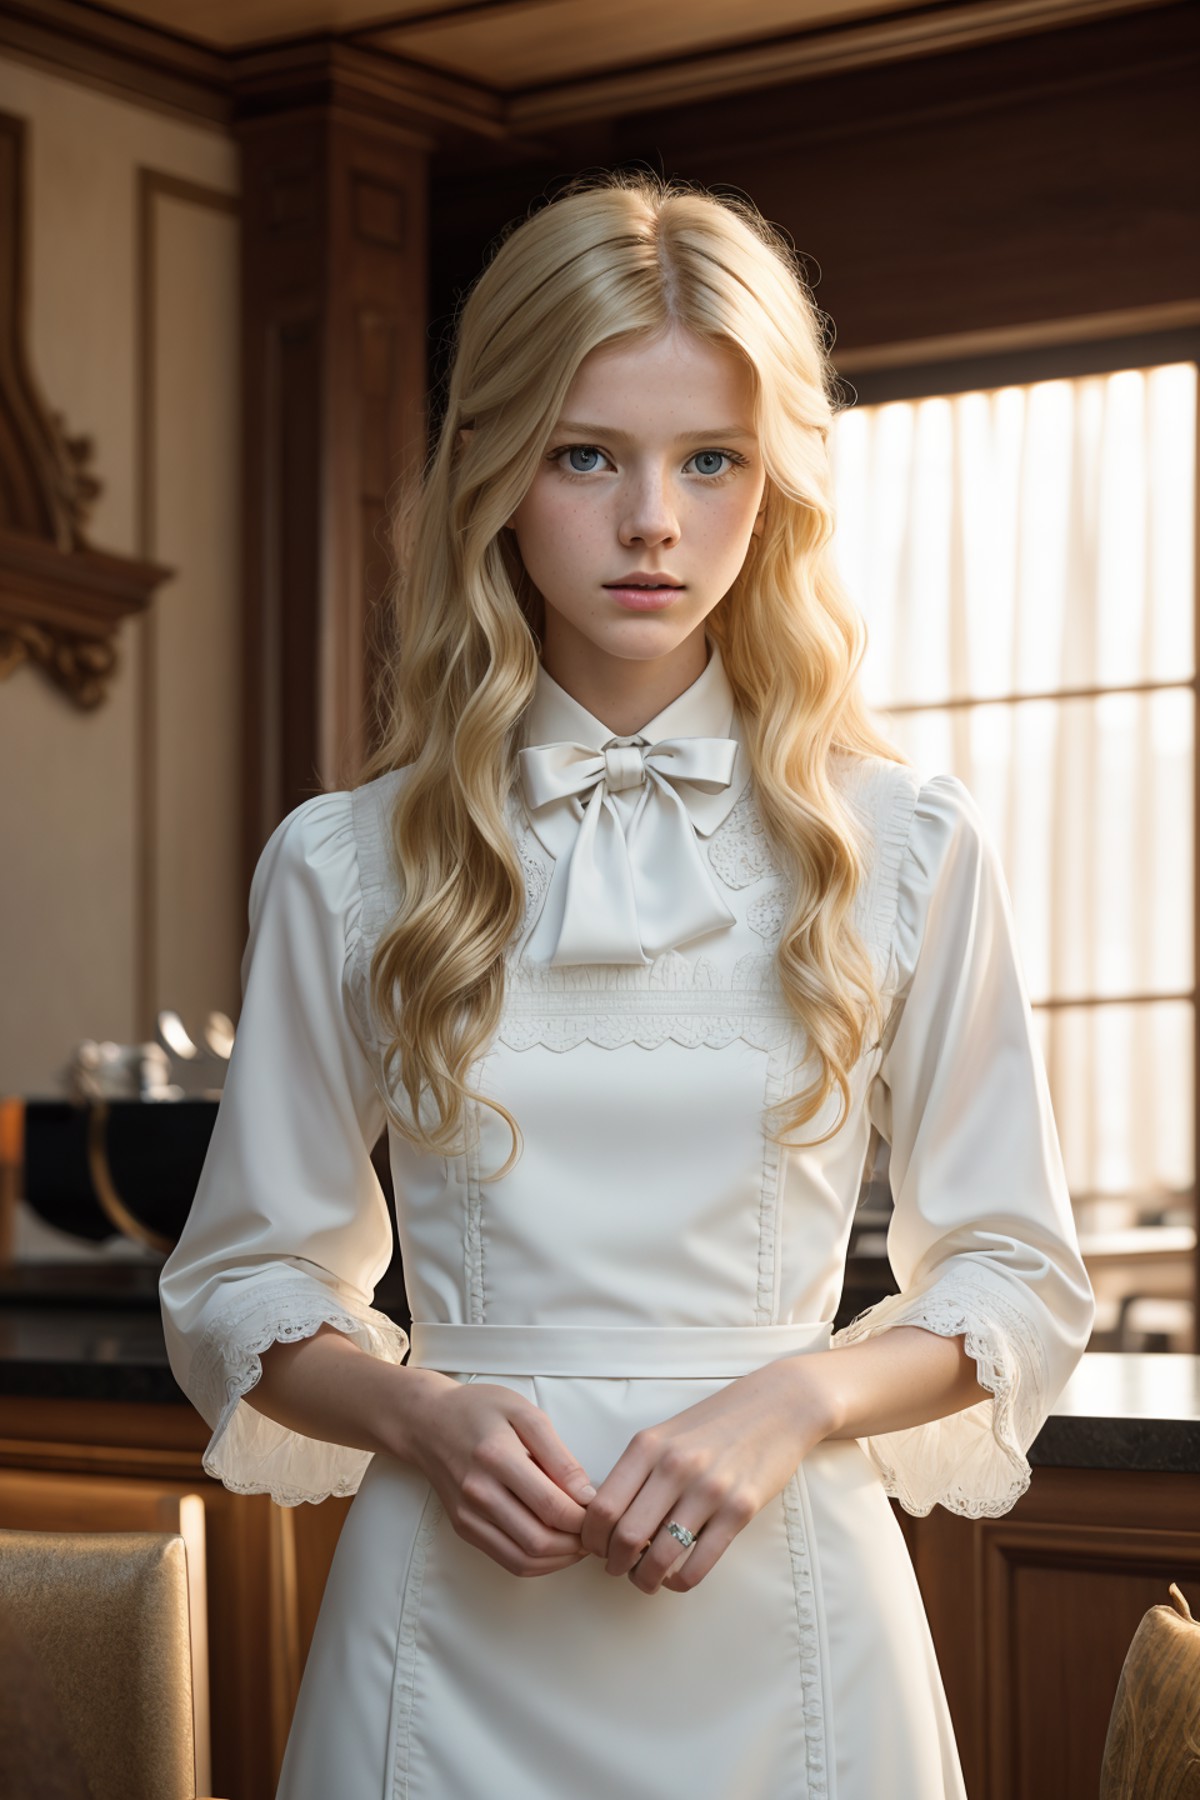 photo of (AnnemarieKuus:0.99), a woman as a waitress, (((walking in a fancy french restaurant))), modelshoot style, (extre...